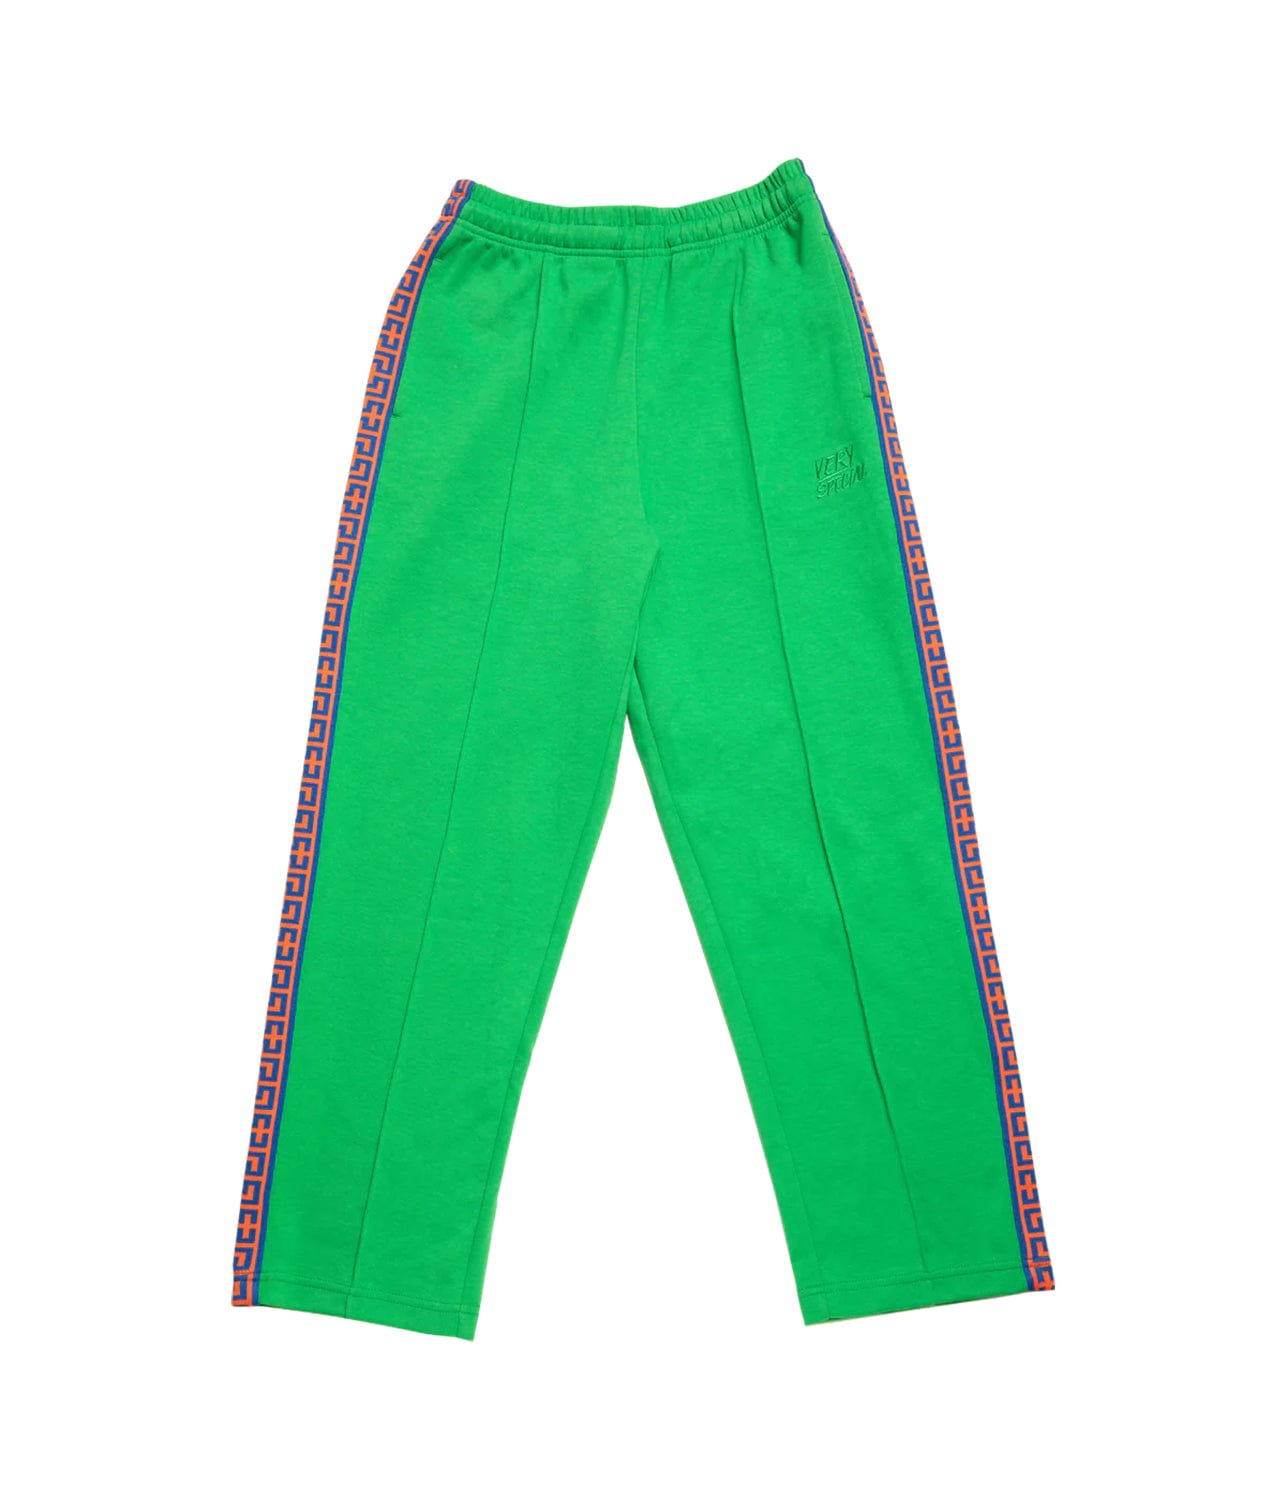 GEO TRACK PANT- GREEN | SOMETHING VERY SPECIAL | SOMETHING VERY SPECIAL GEO TRACK PANT- GREEN